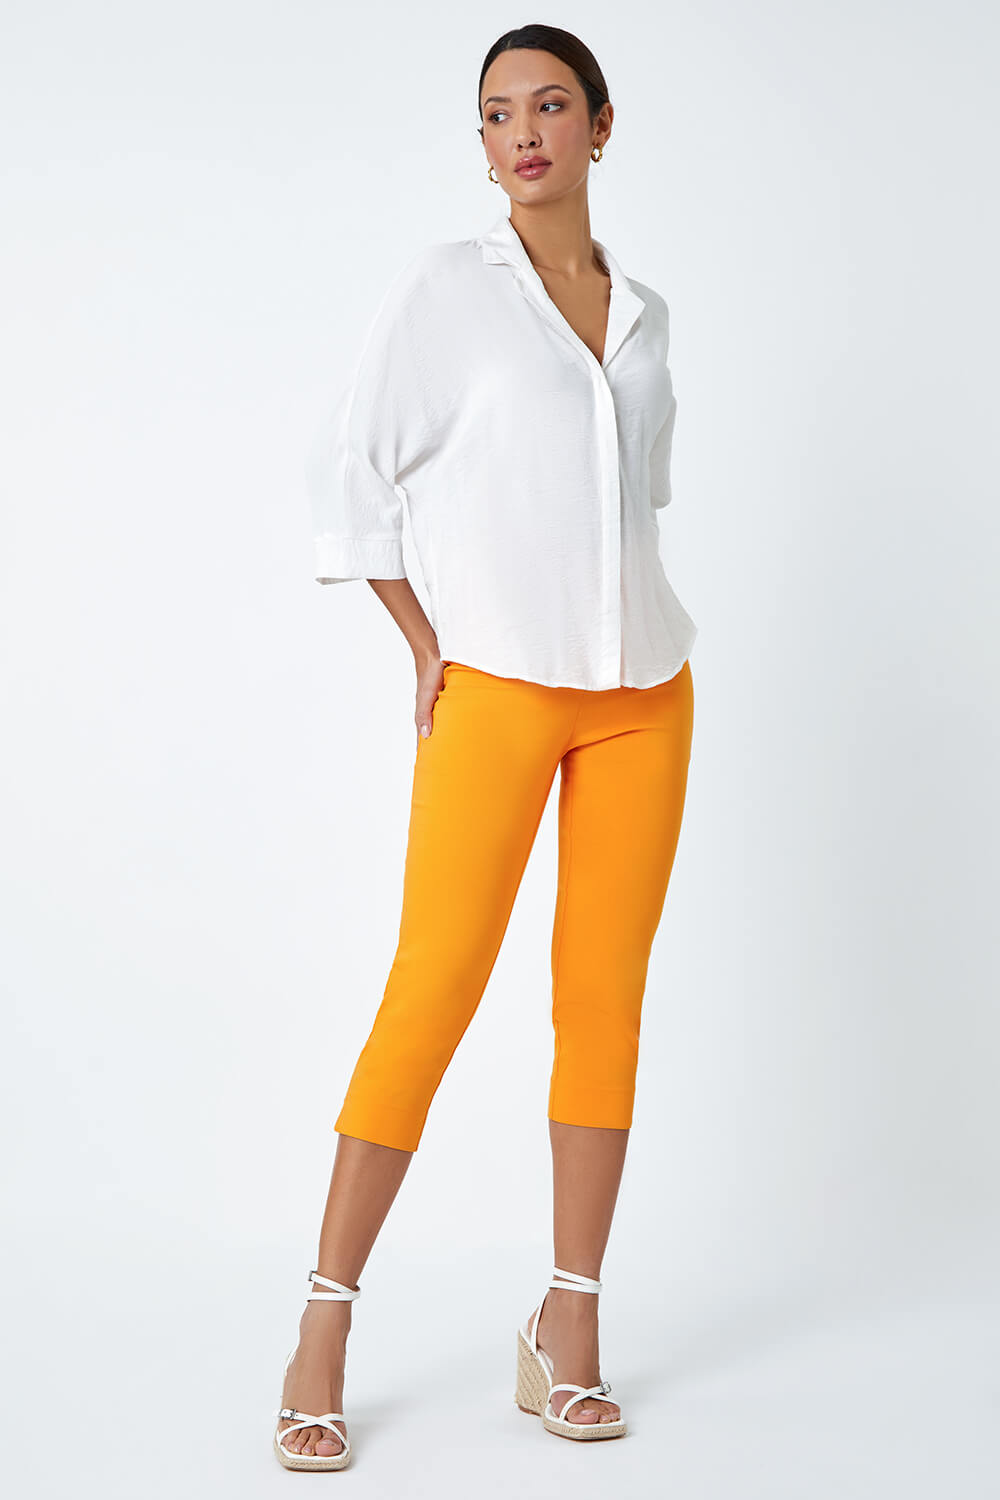 MANGO Cropped Stretch Trousers, Image 2 of 5